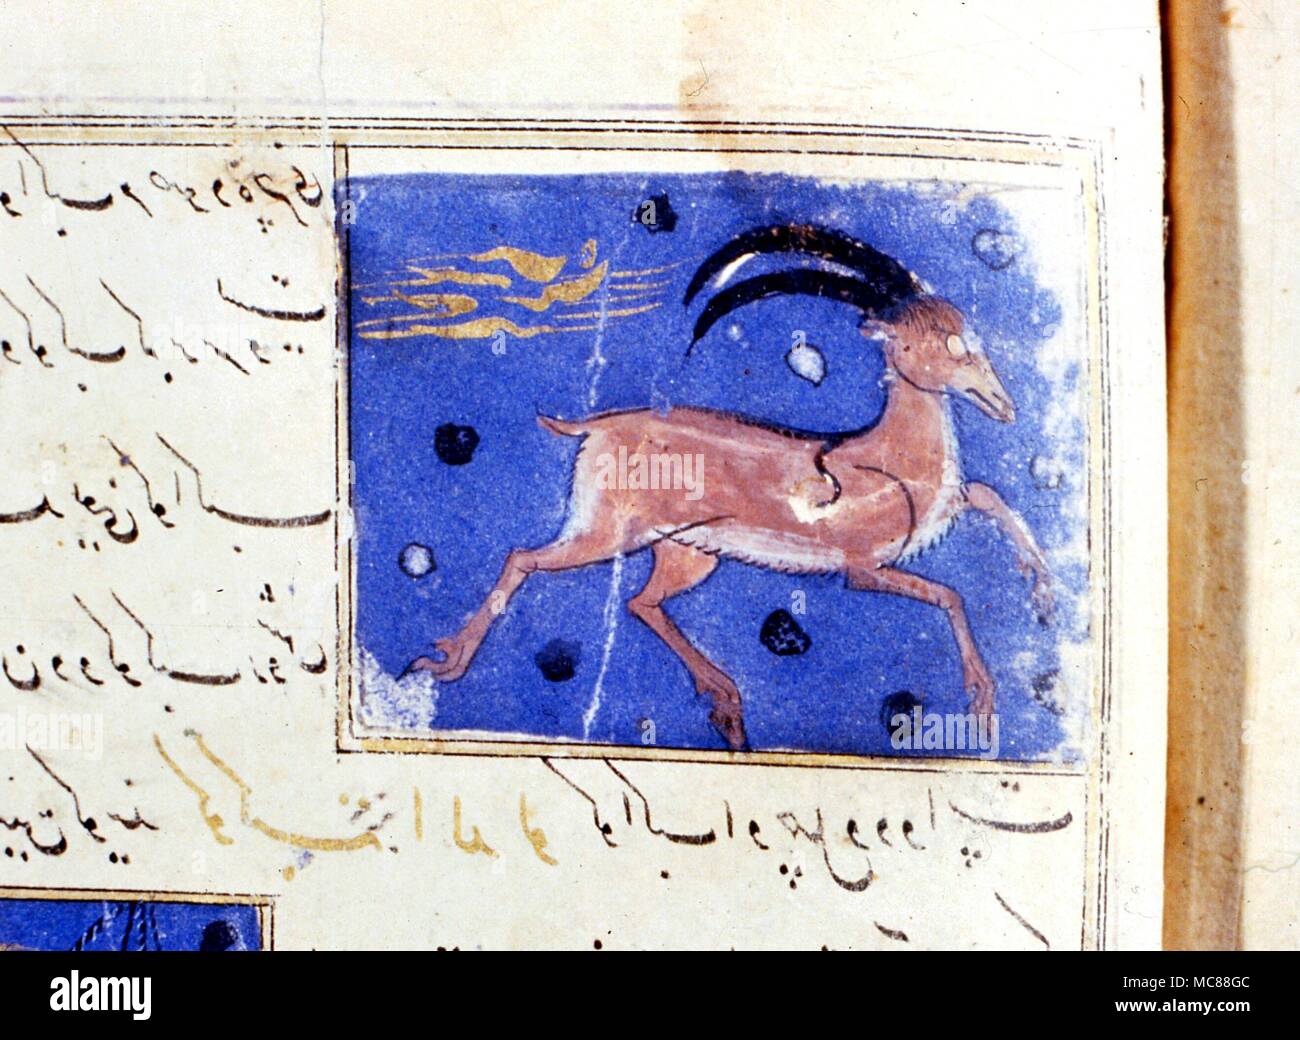 ASTROLOGY - Arabic Image of Capricorn. from a Persian astrological section in Wonders of the World Stock Photo